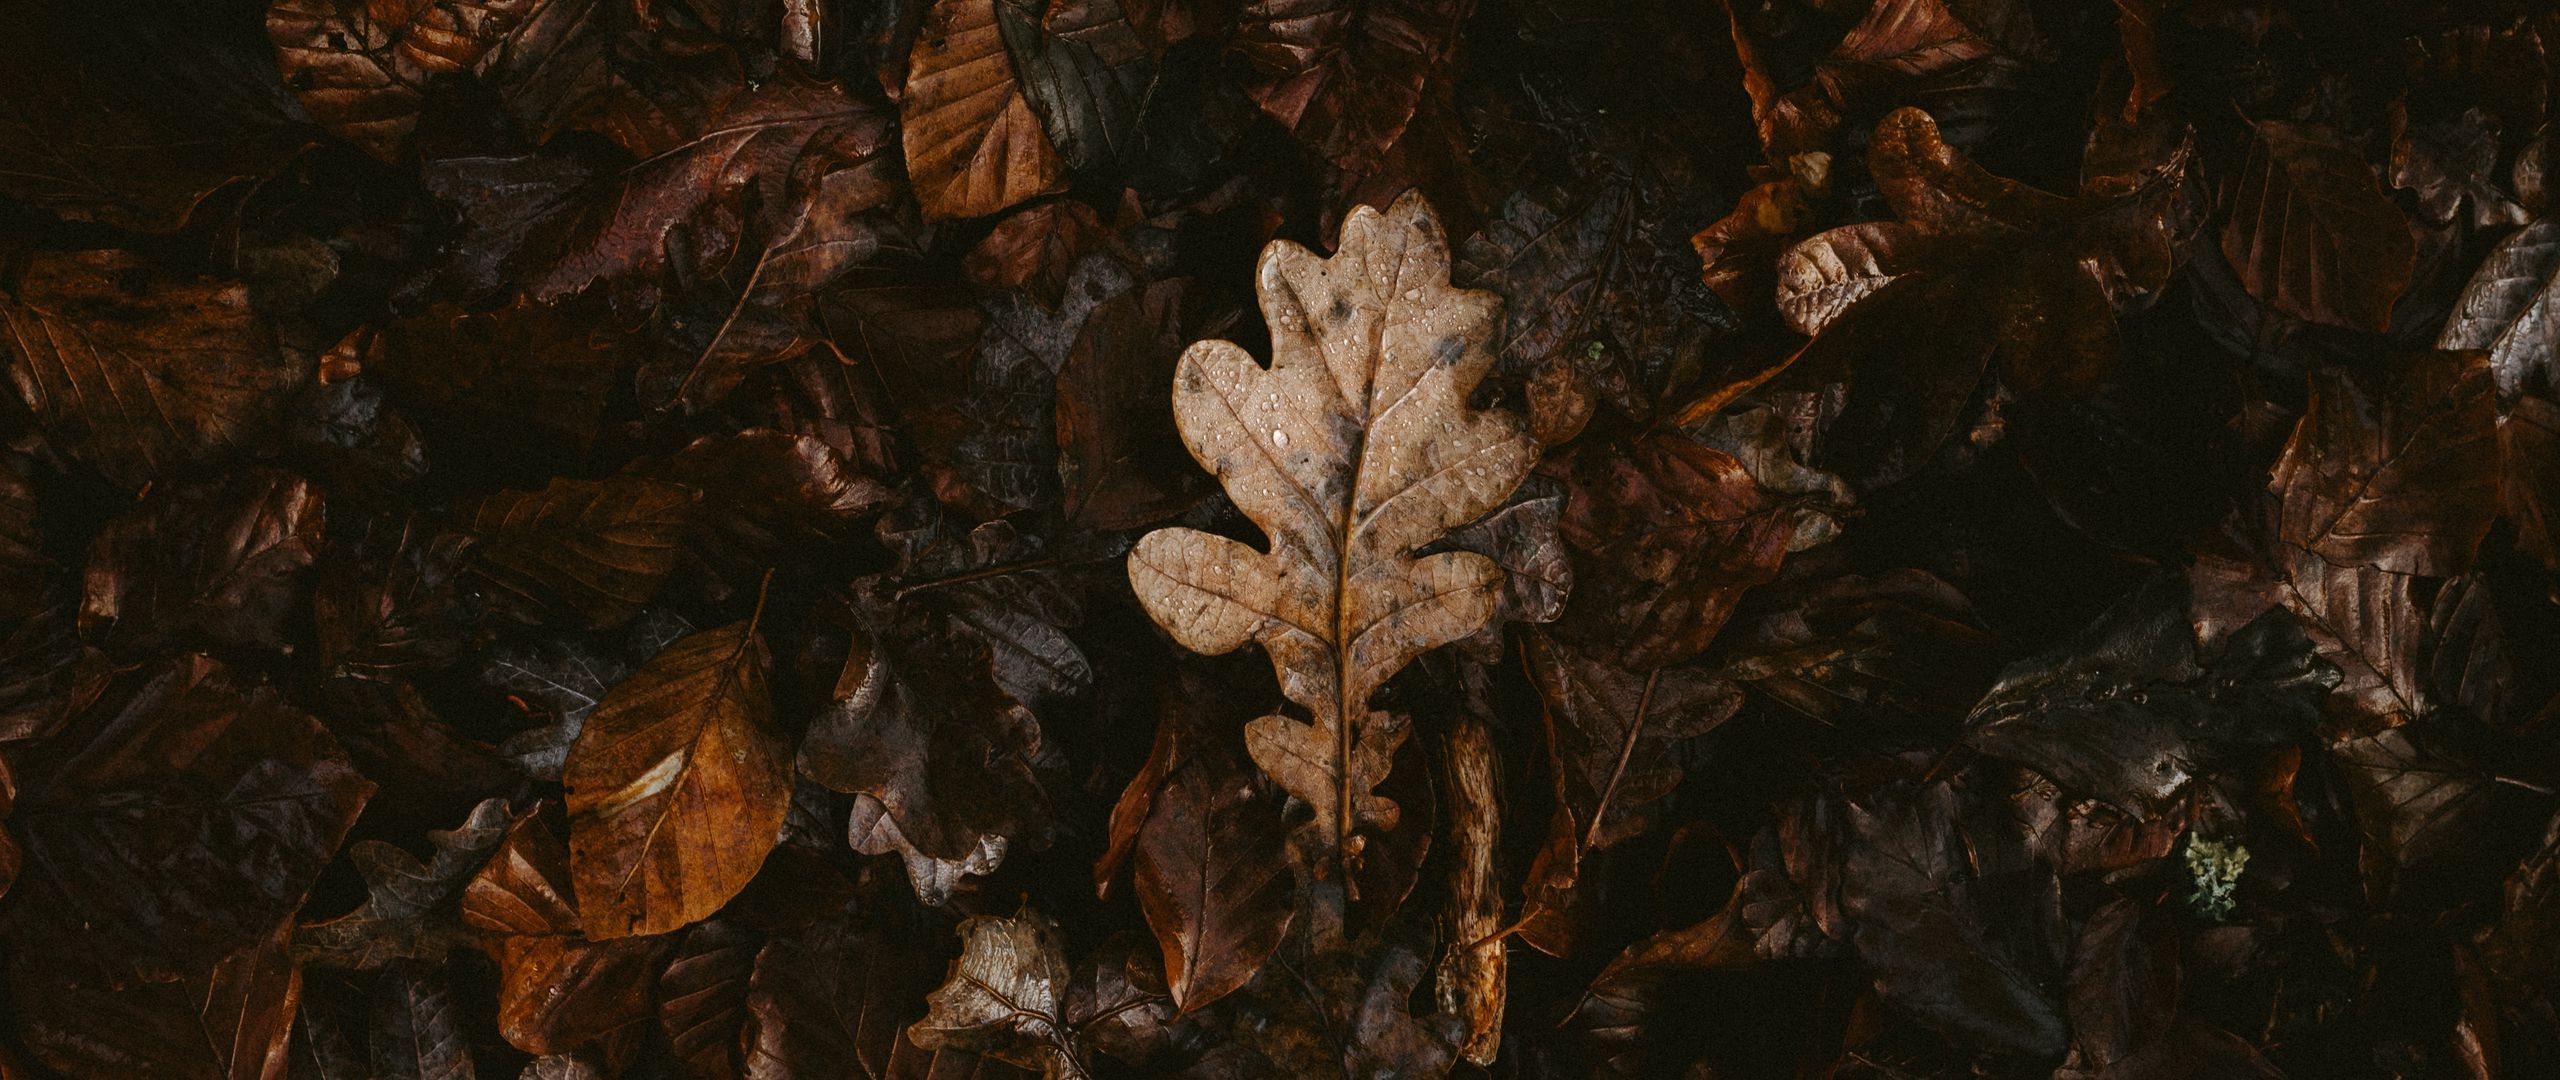 Download wallpaper 2560x1080 leaves, dry, fallen, autumn dual wide 1080p HD background